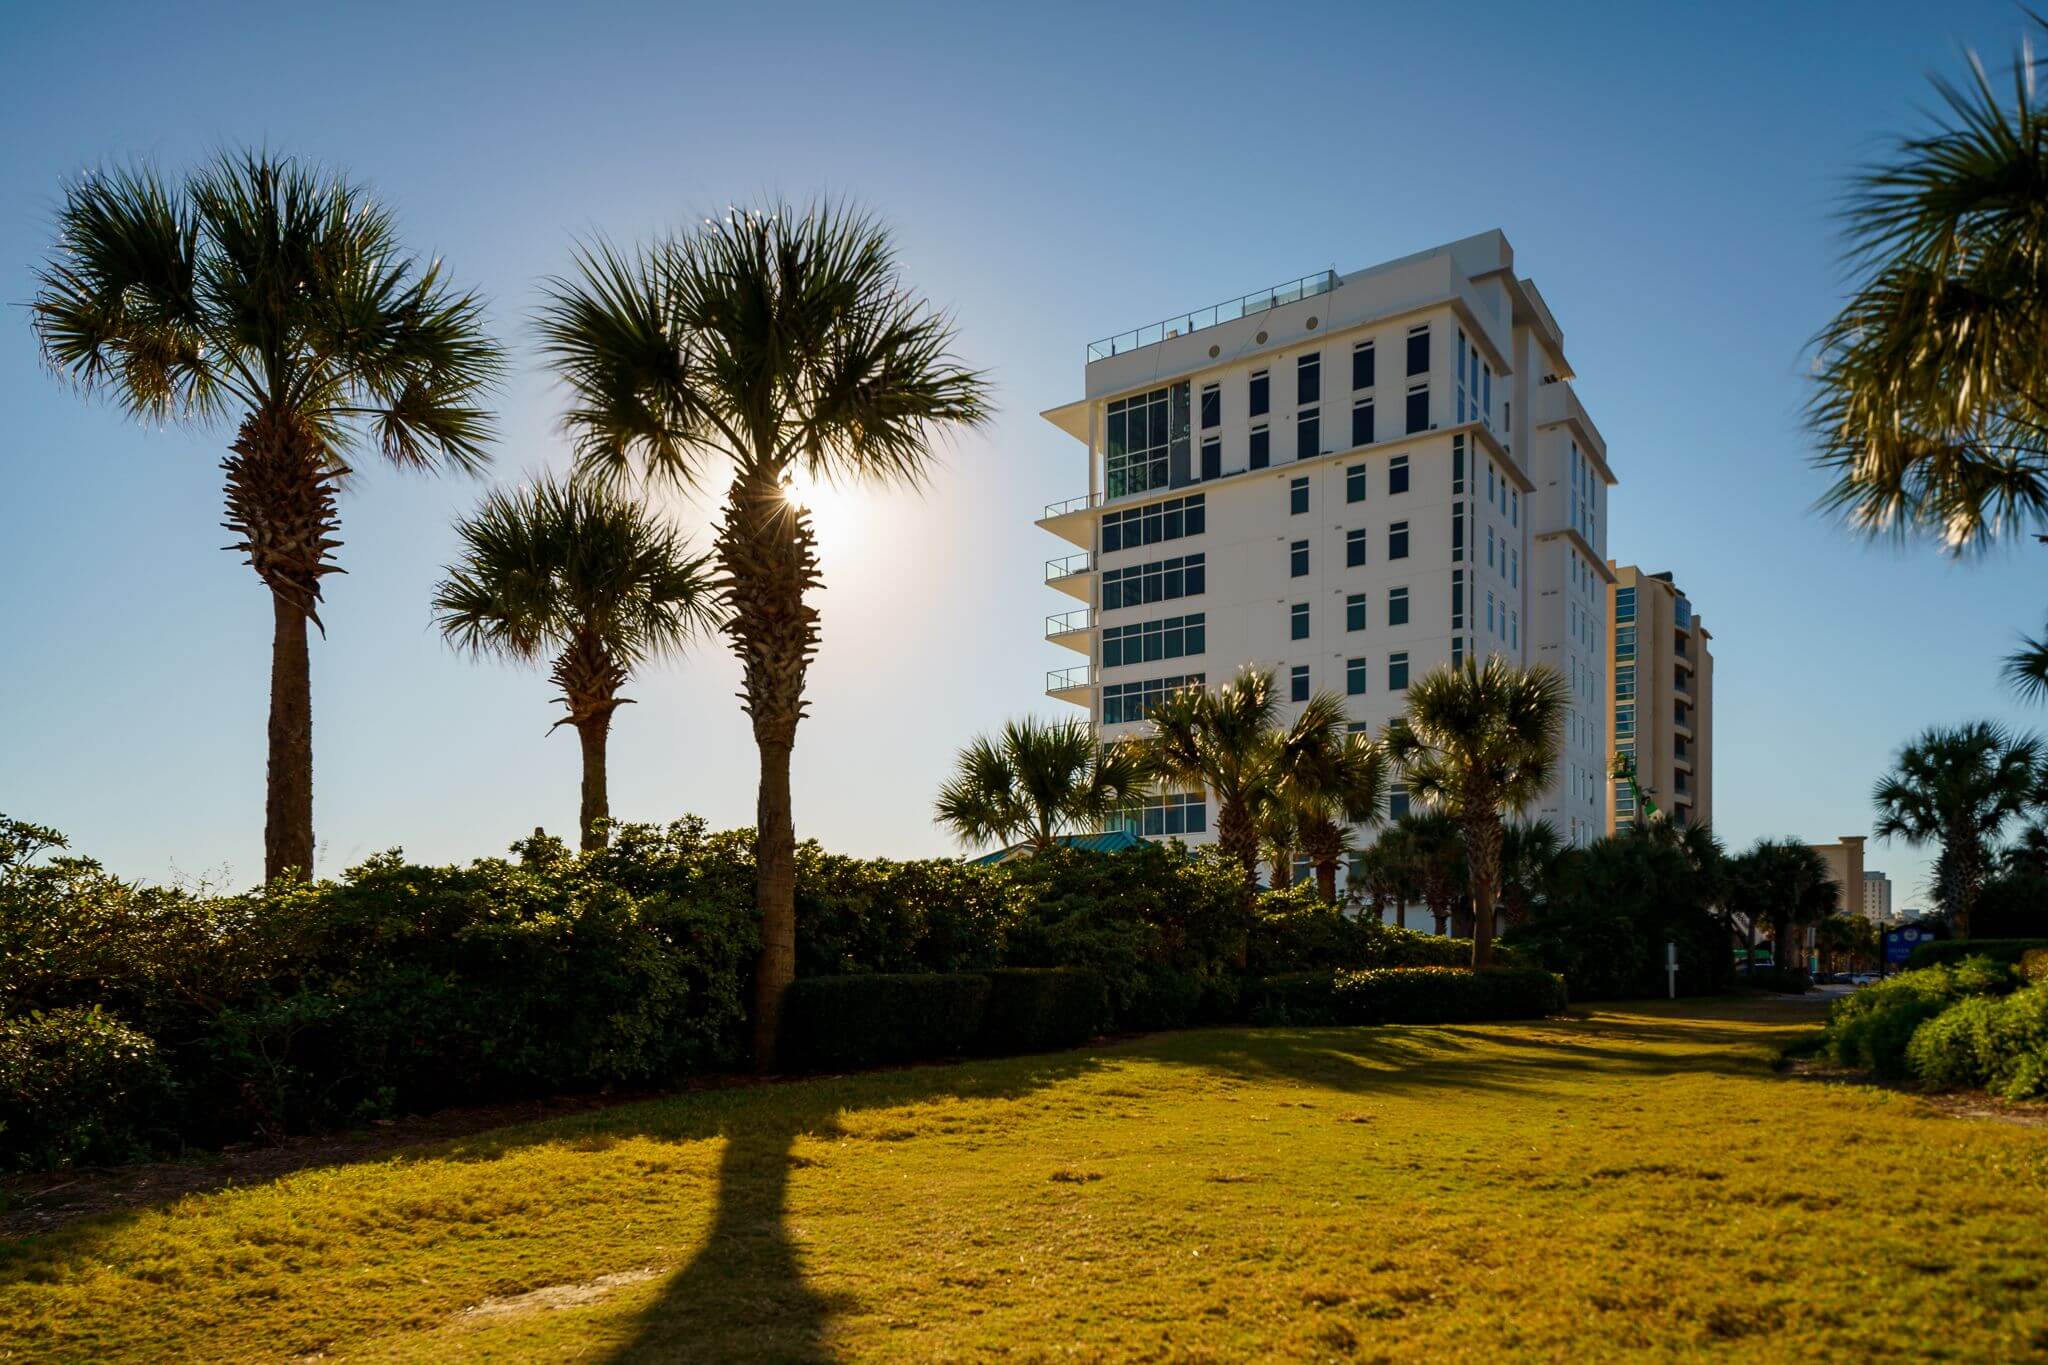 Palm trees in front of a modern white condo building.